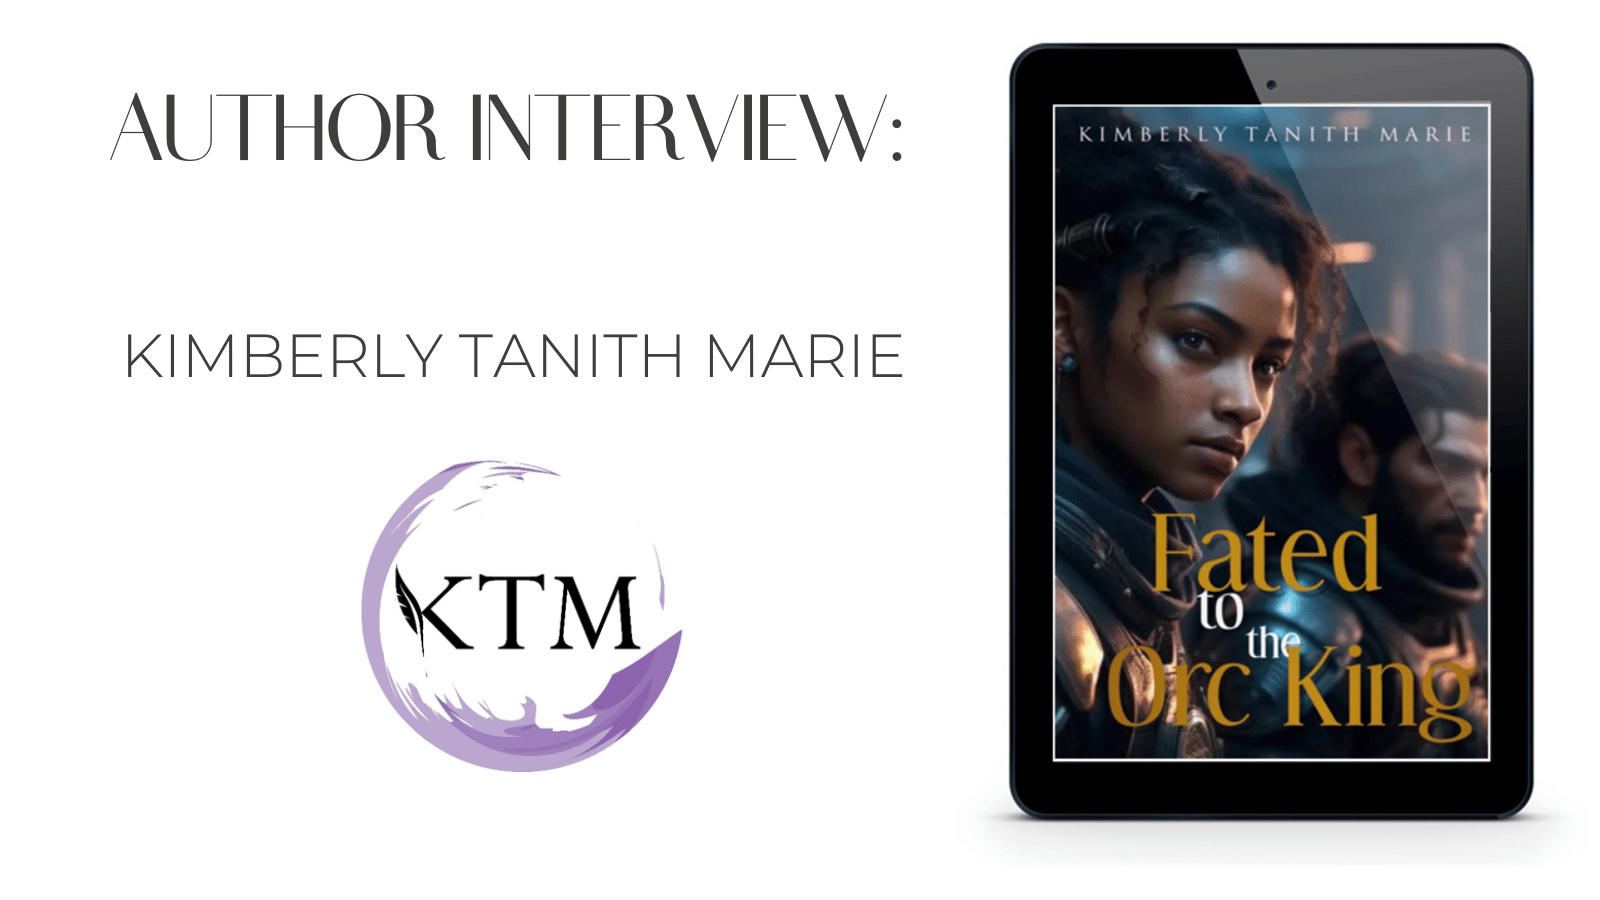 Author interview: Kimberly Tanith Marie